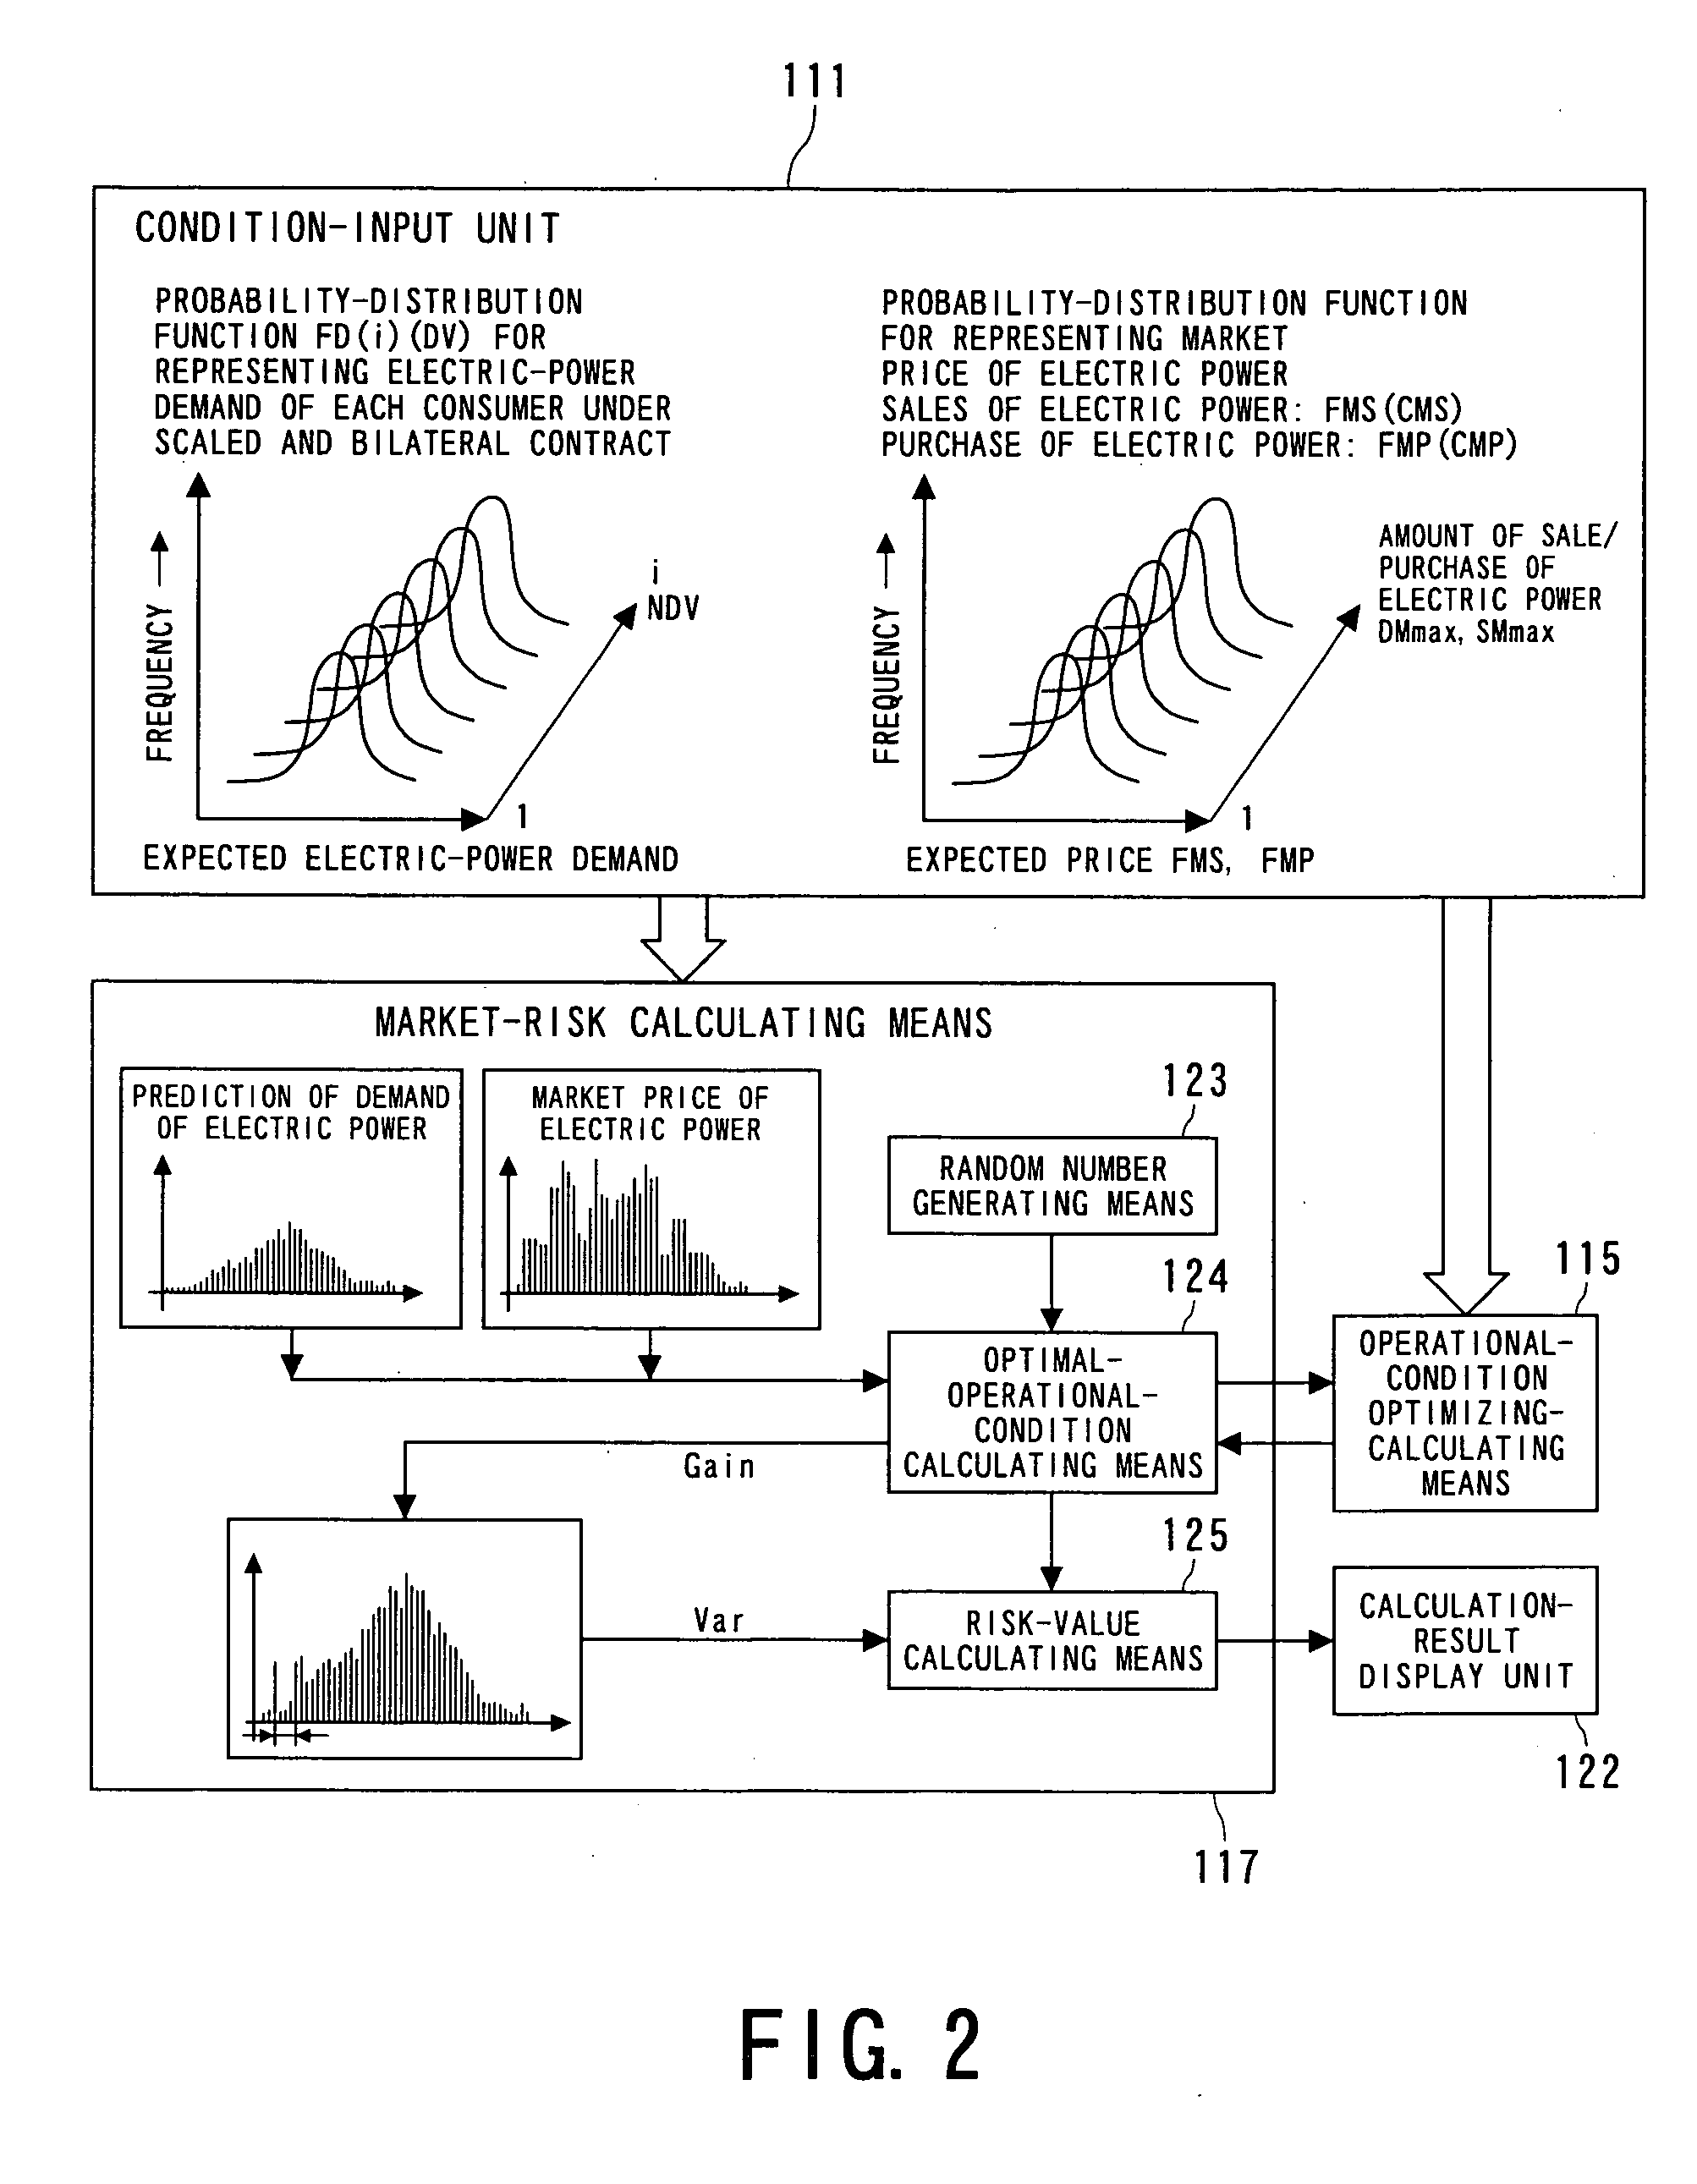 Electric-power-generating-facility operation management support system, electric-power-generating-facility operation management support method, and program for executing support method, and program for executing operation management support method on computer